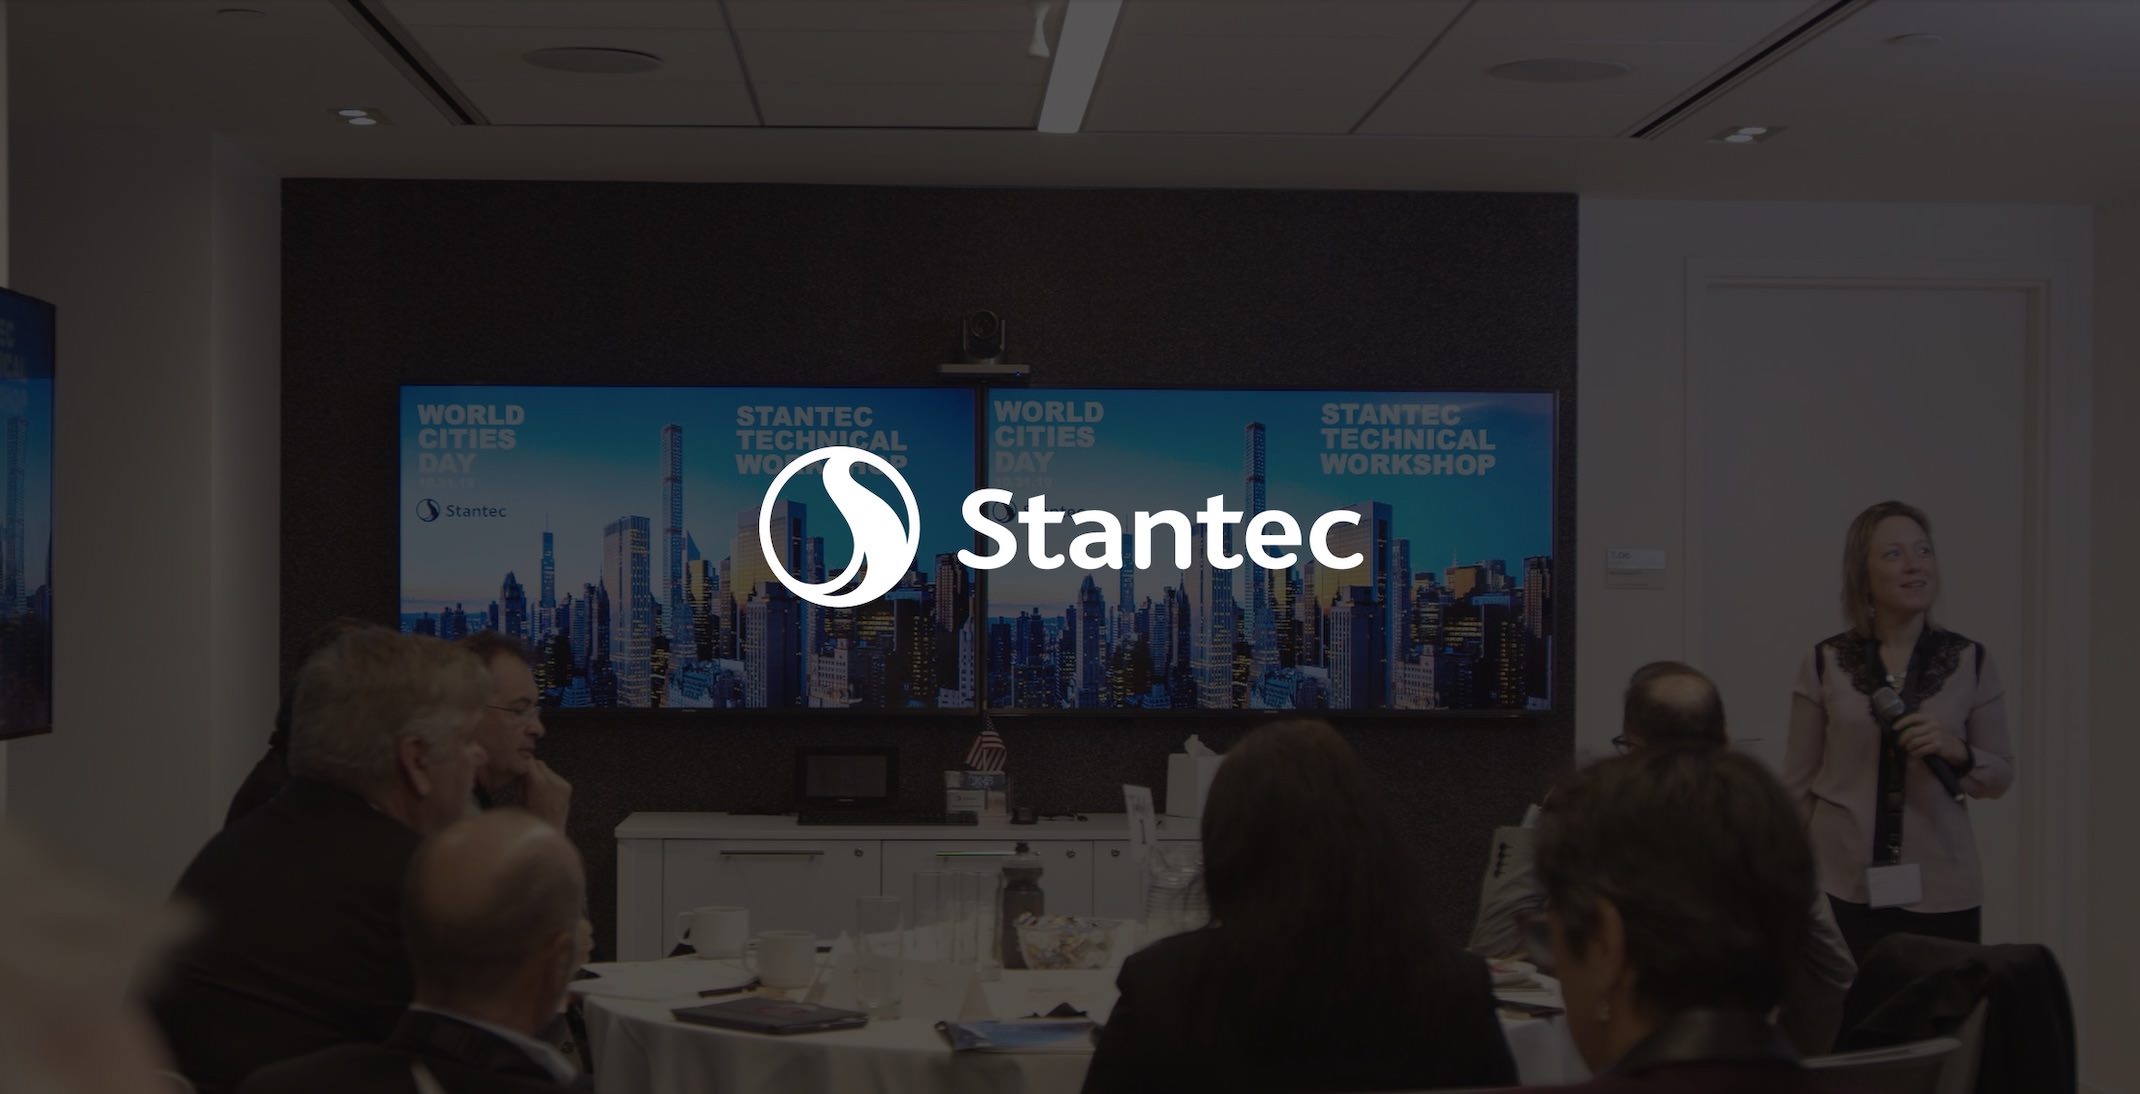 IU C&I Studios Page White Stantec logo over dimmed background of Live Video Streaming Event with many people in a room with video conferencing displays